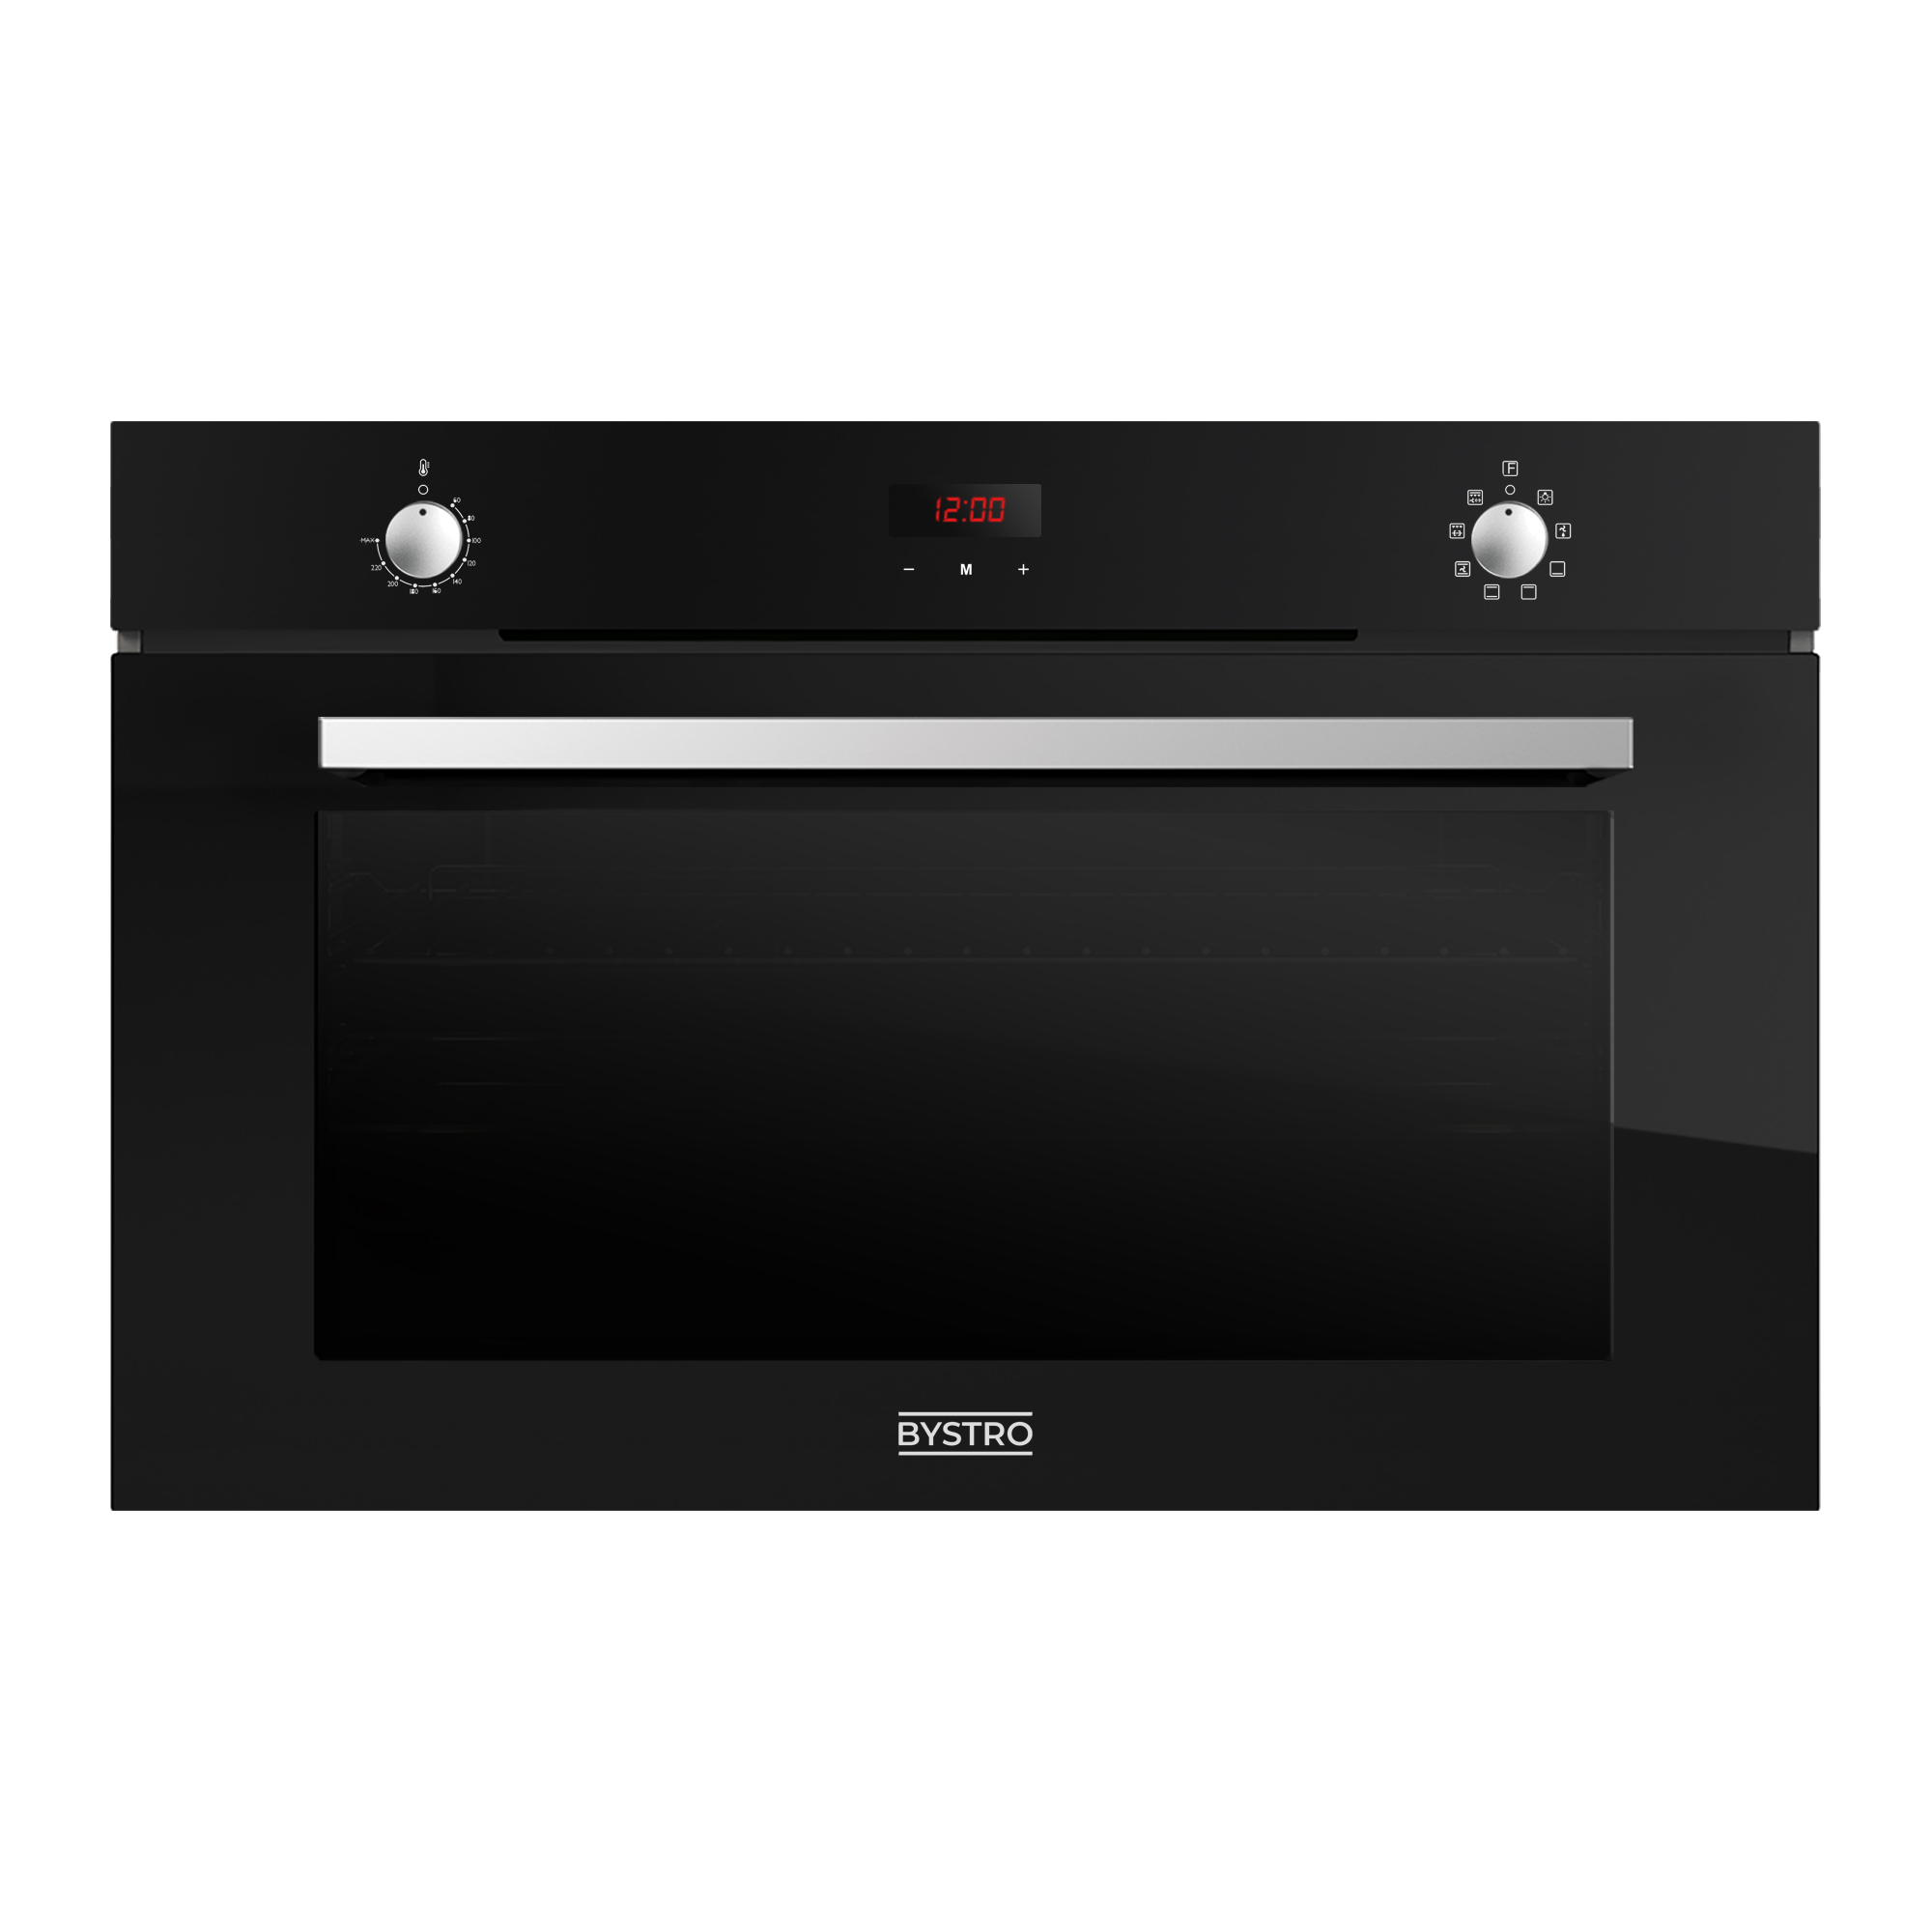 Essential Tips On Maintaining Your Built-In Oven